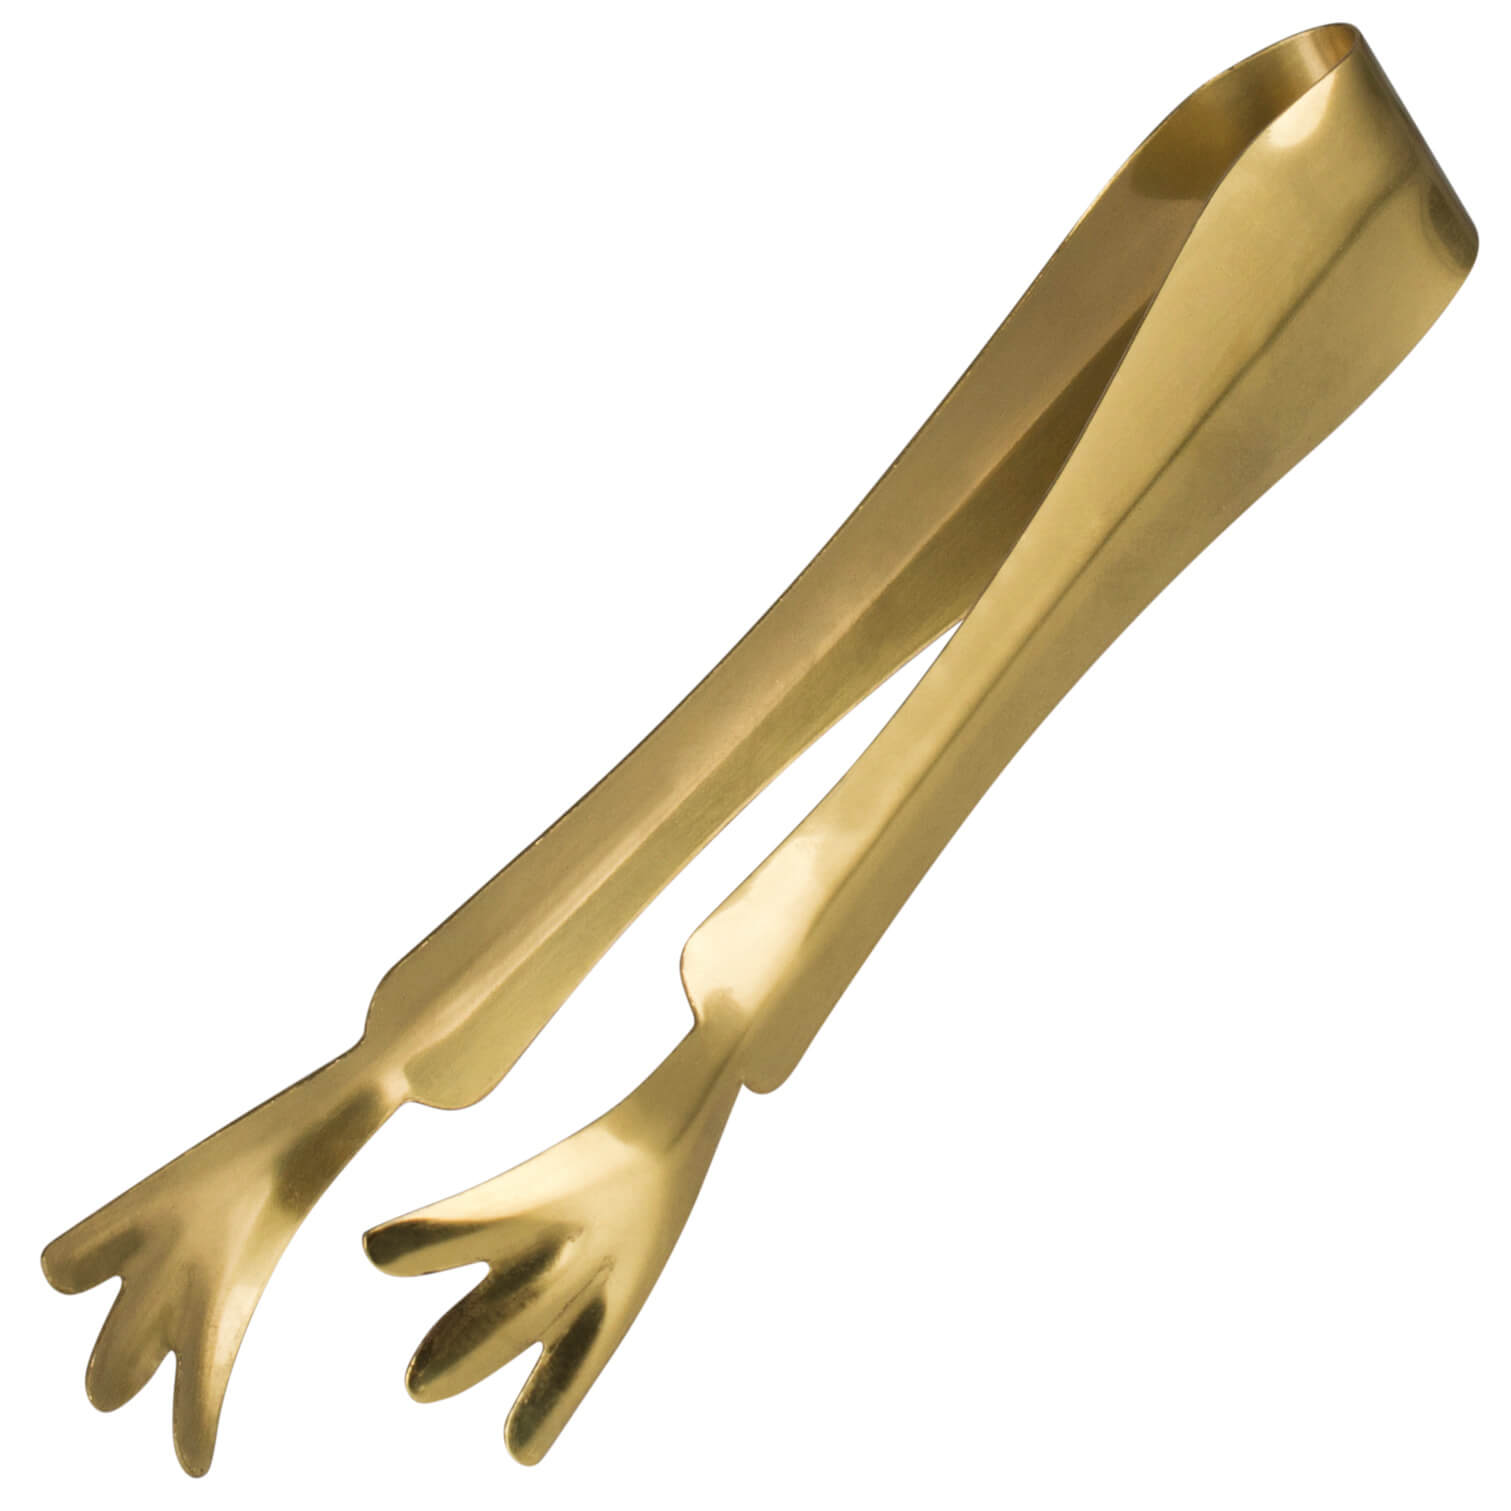 Tongs Chicken Feet, Prime Bar - gold-colored (17cm)